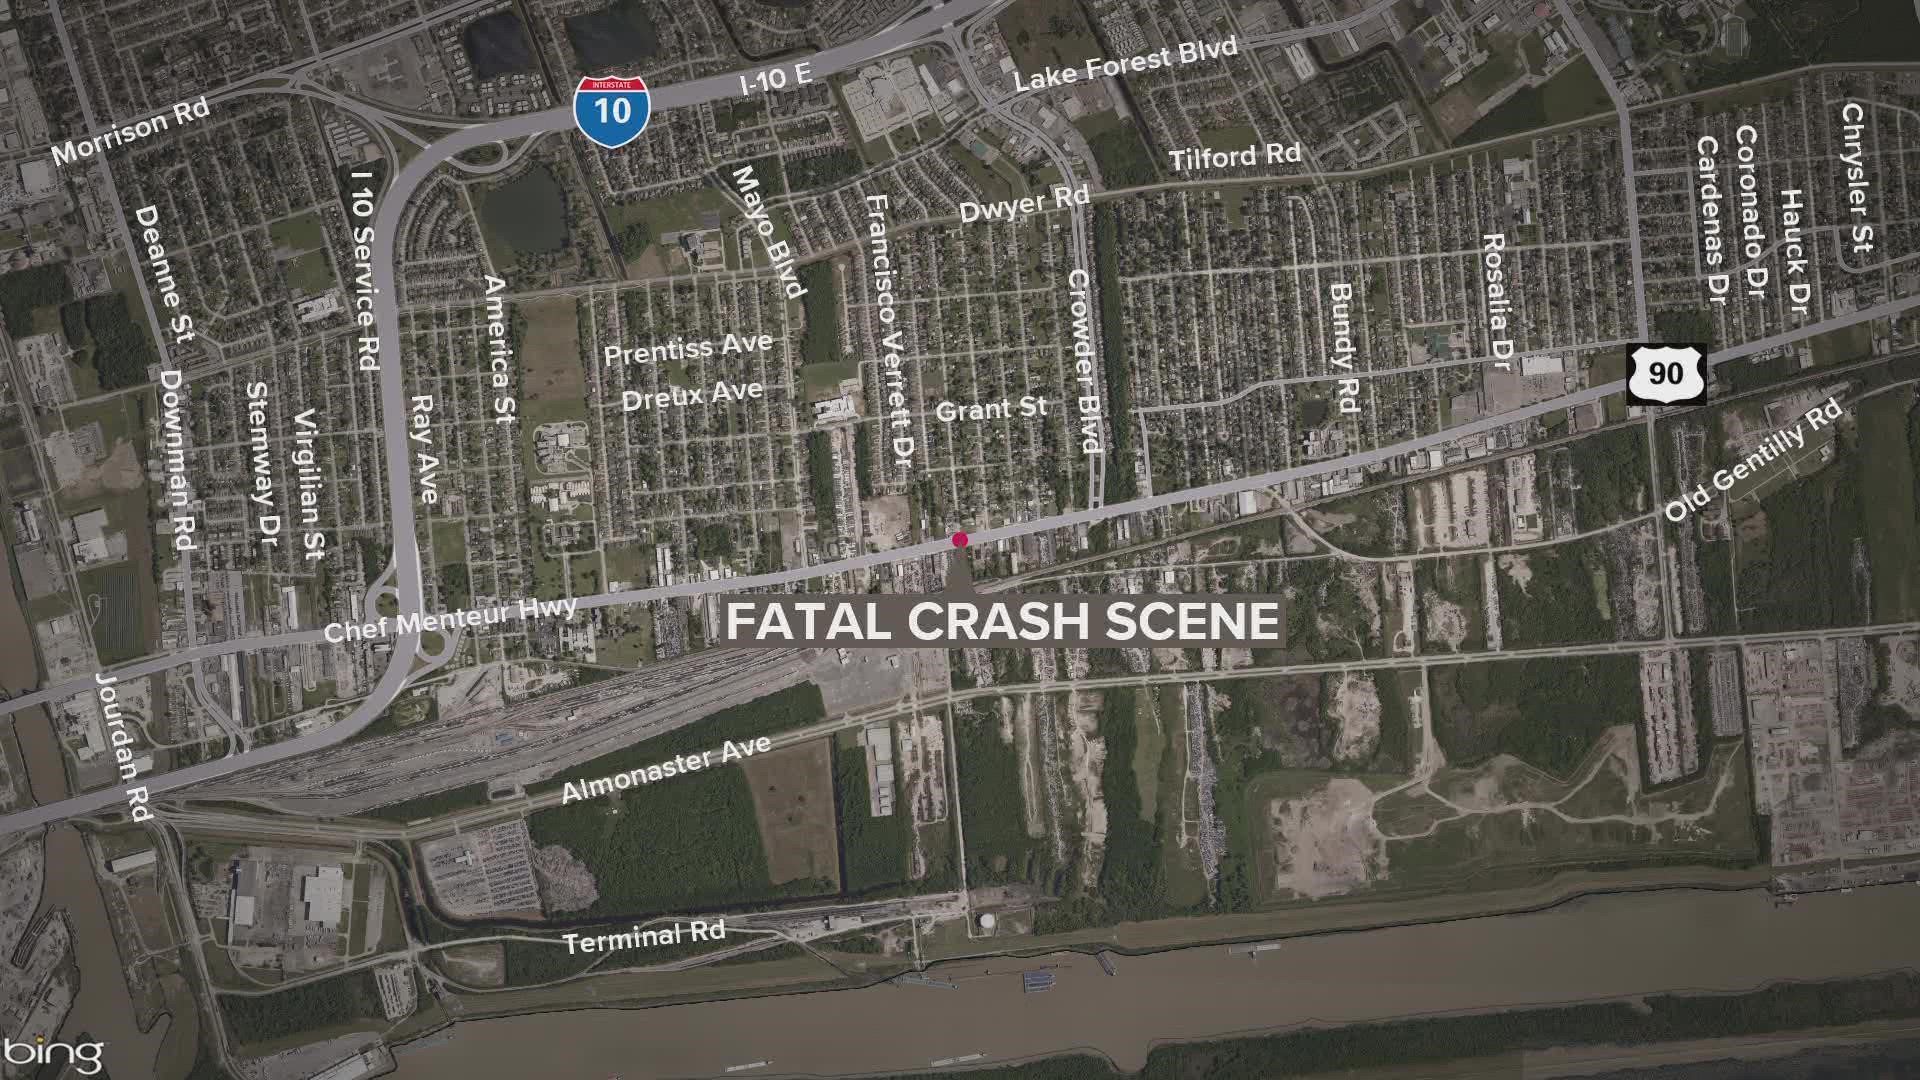 Police say the crash happened at the intersection of Chef Menteur Highway and Werner Drive around 1:15 a.m.